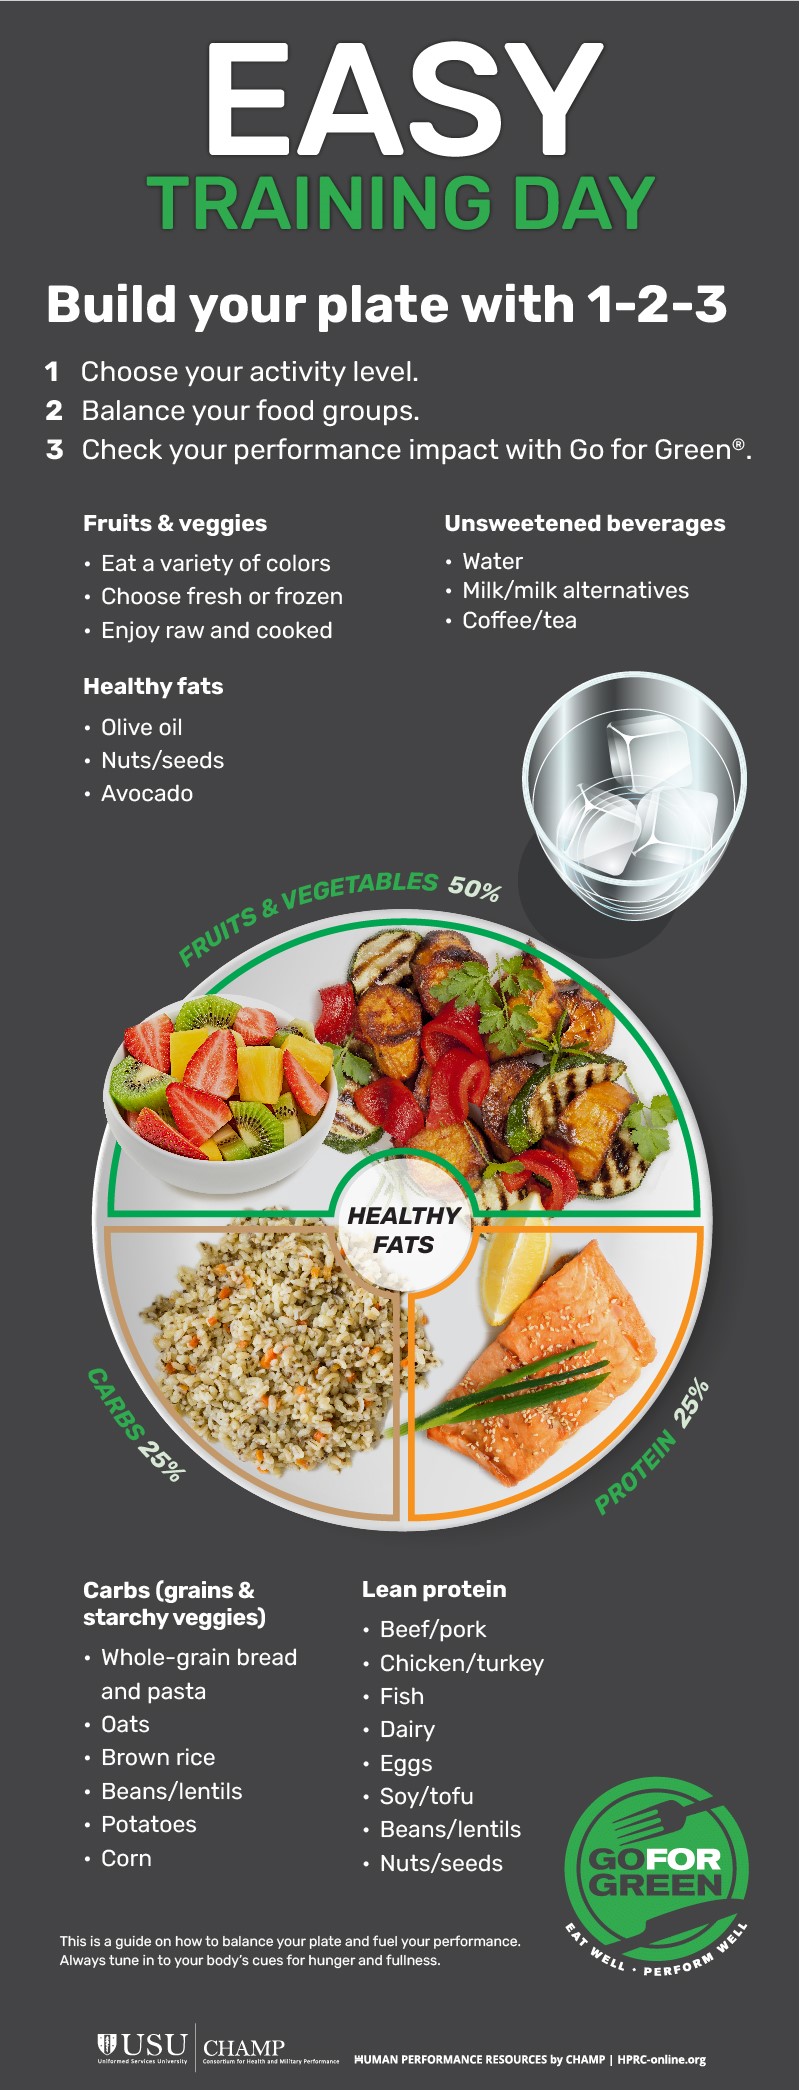 This is a graphic depicting a plate showing what to eat on an easy training day.  Title: Easy Training Day Build your plate with 1-2-3 1.	Choose your activity level. 2.	Balance your food groups. 3.	Check your performance impact using Go for Green®. [Plate image with foods representing each type and portion of the plate, and “Healthy fats” in a small circle in the center] “Fruits & Vegetables 50%” [around the top half of the plate], “Carbs 25%, Protein 25%” [around the bottom half of the plate]  Fruits & veggies •	Eat a variety of colors •	Choose fresh or frozen •	Enjoy raw and cooked Unsweetened beverages •	Water •	Milk/milk alternatives •	Coffee/tea Healthy fats •	Olive oil •	Nuts/seeds •	Avocado  Carbs (grains & starchy veggies) •	Whole-grain bread and pasta •	Oats •	Brown rice •	Beans/lentils •	Potatoes •	Corn  Lean protein •	Beef/pork •	Chicken/turkey •	Fish •	Dairy •	Eggs •	Soy/tofu •	Beans/lentils •	Nuts/seeds This is a guide on how to balance your plate and fuel your performance. Always tune in to your body’s cues for hunger and fullness.  “GoForGreen” green circular logo with the text, “Eat well, Perform well” Footer: USU logo for Uniformed Services University | CHAMP logo for the Consortium for Health and Military Performance Human Performance Resources by CHAMP | HPRC-online.org